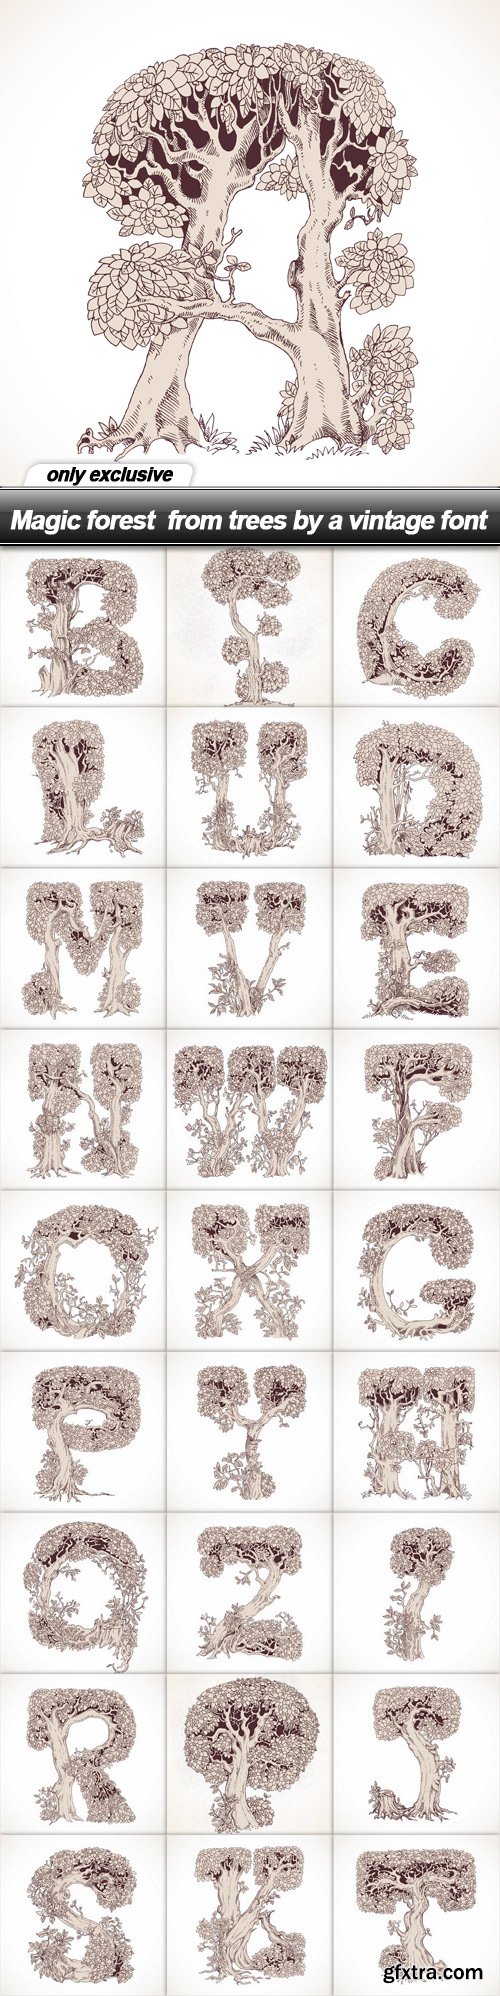 Magic forest from trees by a vintage font - 28 EPS